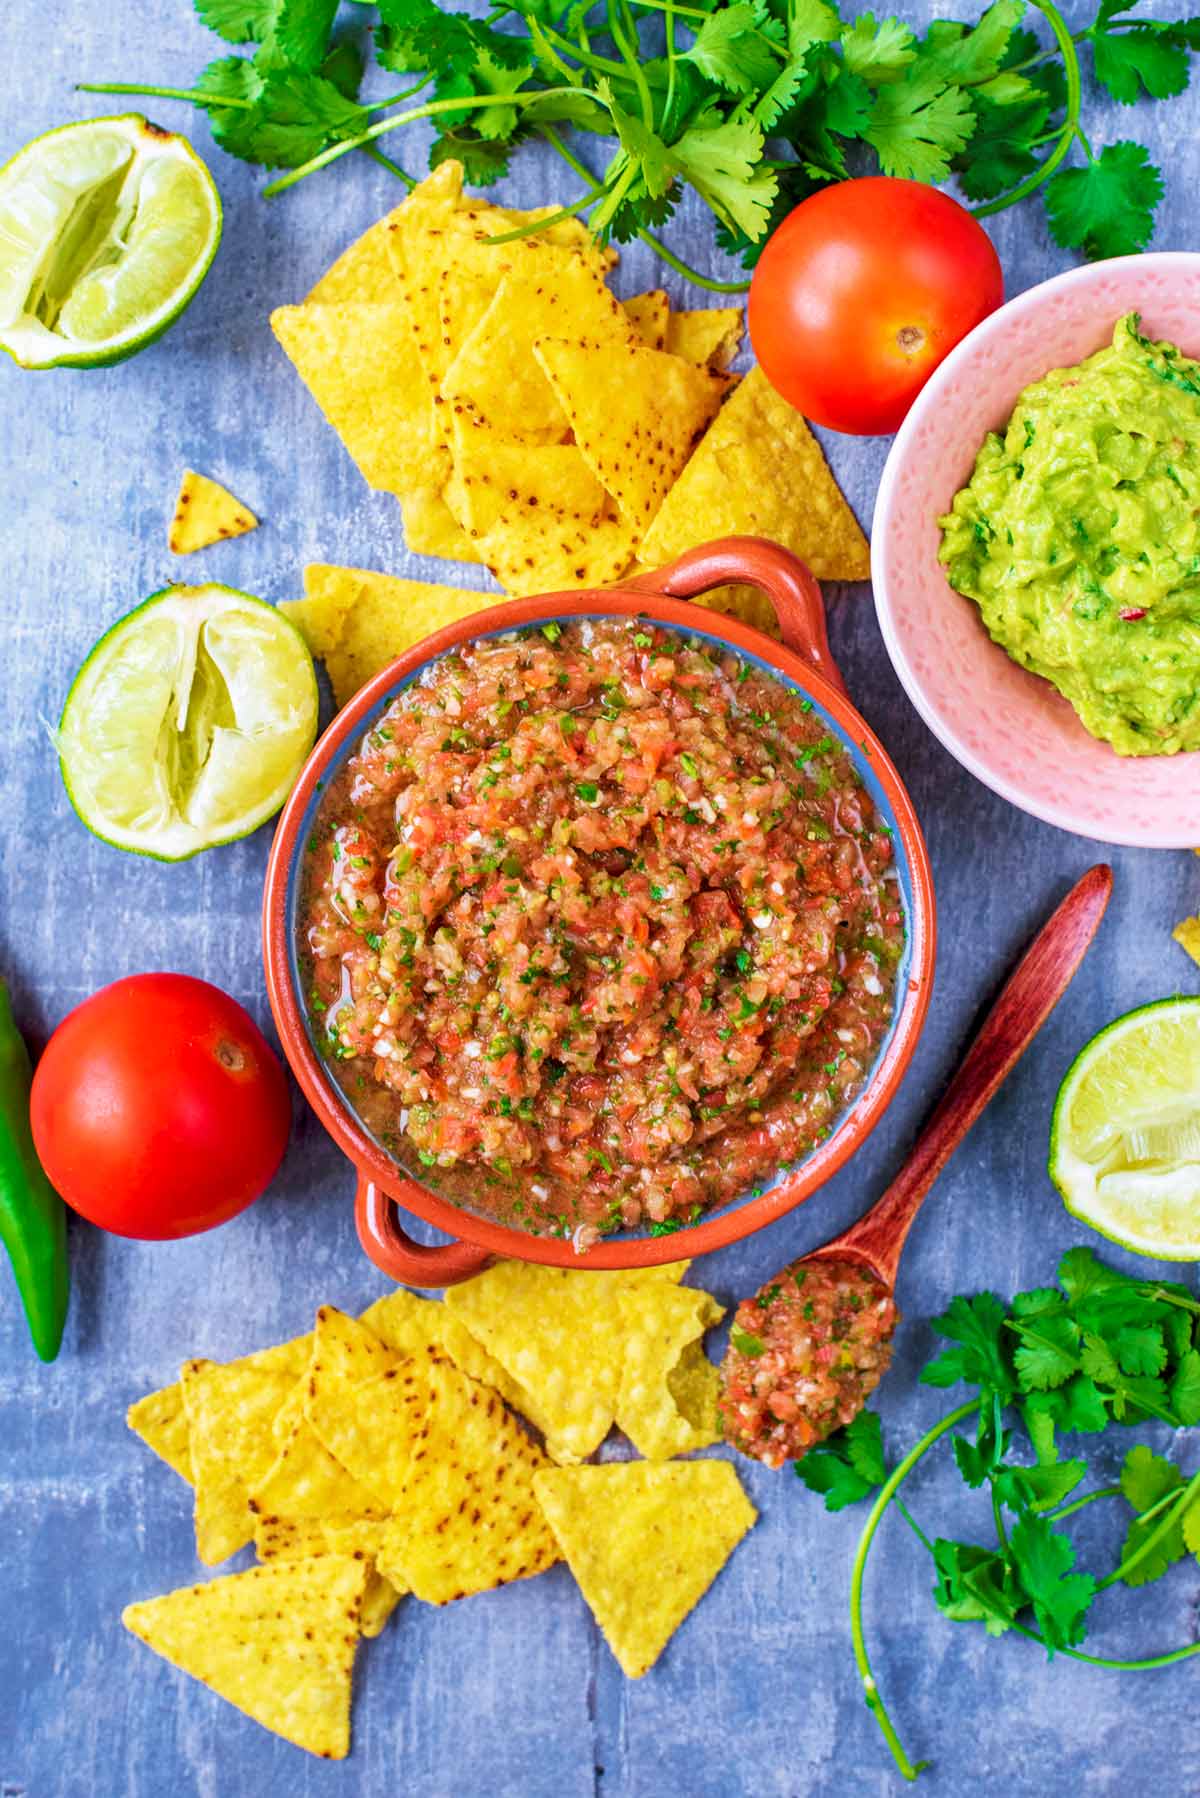 A bowl of Salsa surrounded by tortilla chips, guacamole, limes and herbs.